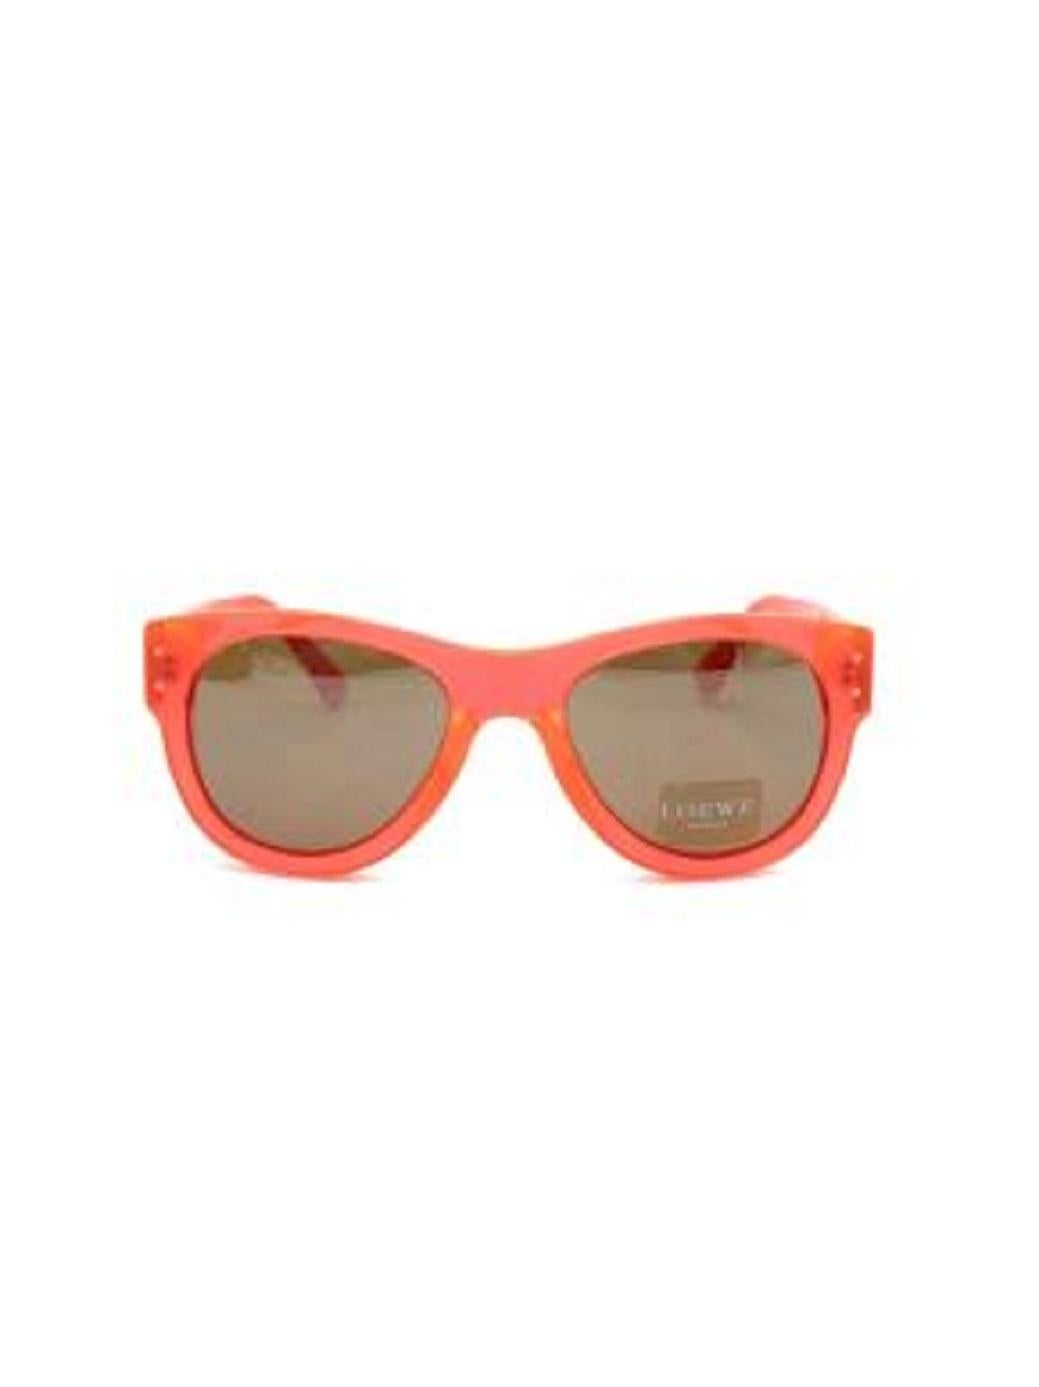 Loewe SLW779N Orange Sunglasses

-Orange framed 
-Black lenses
-Oval shape 
-Black engraving logo 

Material: 

Acetate 
Plastic 

Made in Italy 

E NOTE, THESE ITEMS ARE PRE-OWNED AND MAY SHOW SIGNS OF BEING STORED EVEN WHEN UNWORN AND UNUSED. THIS